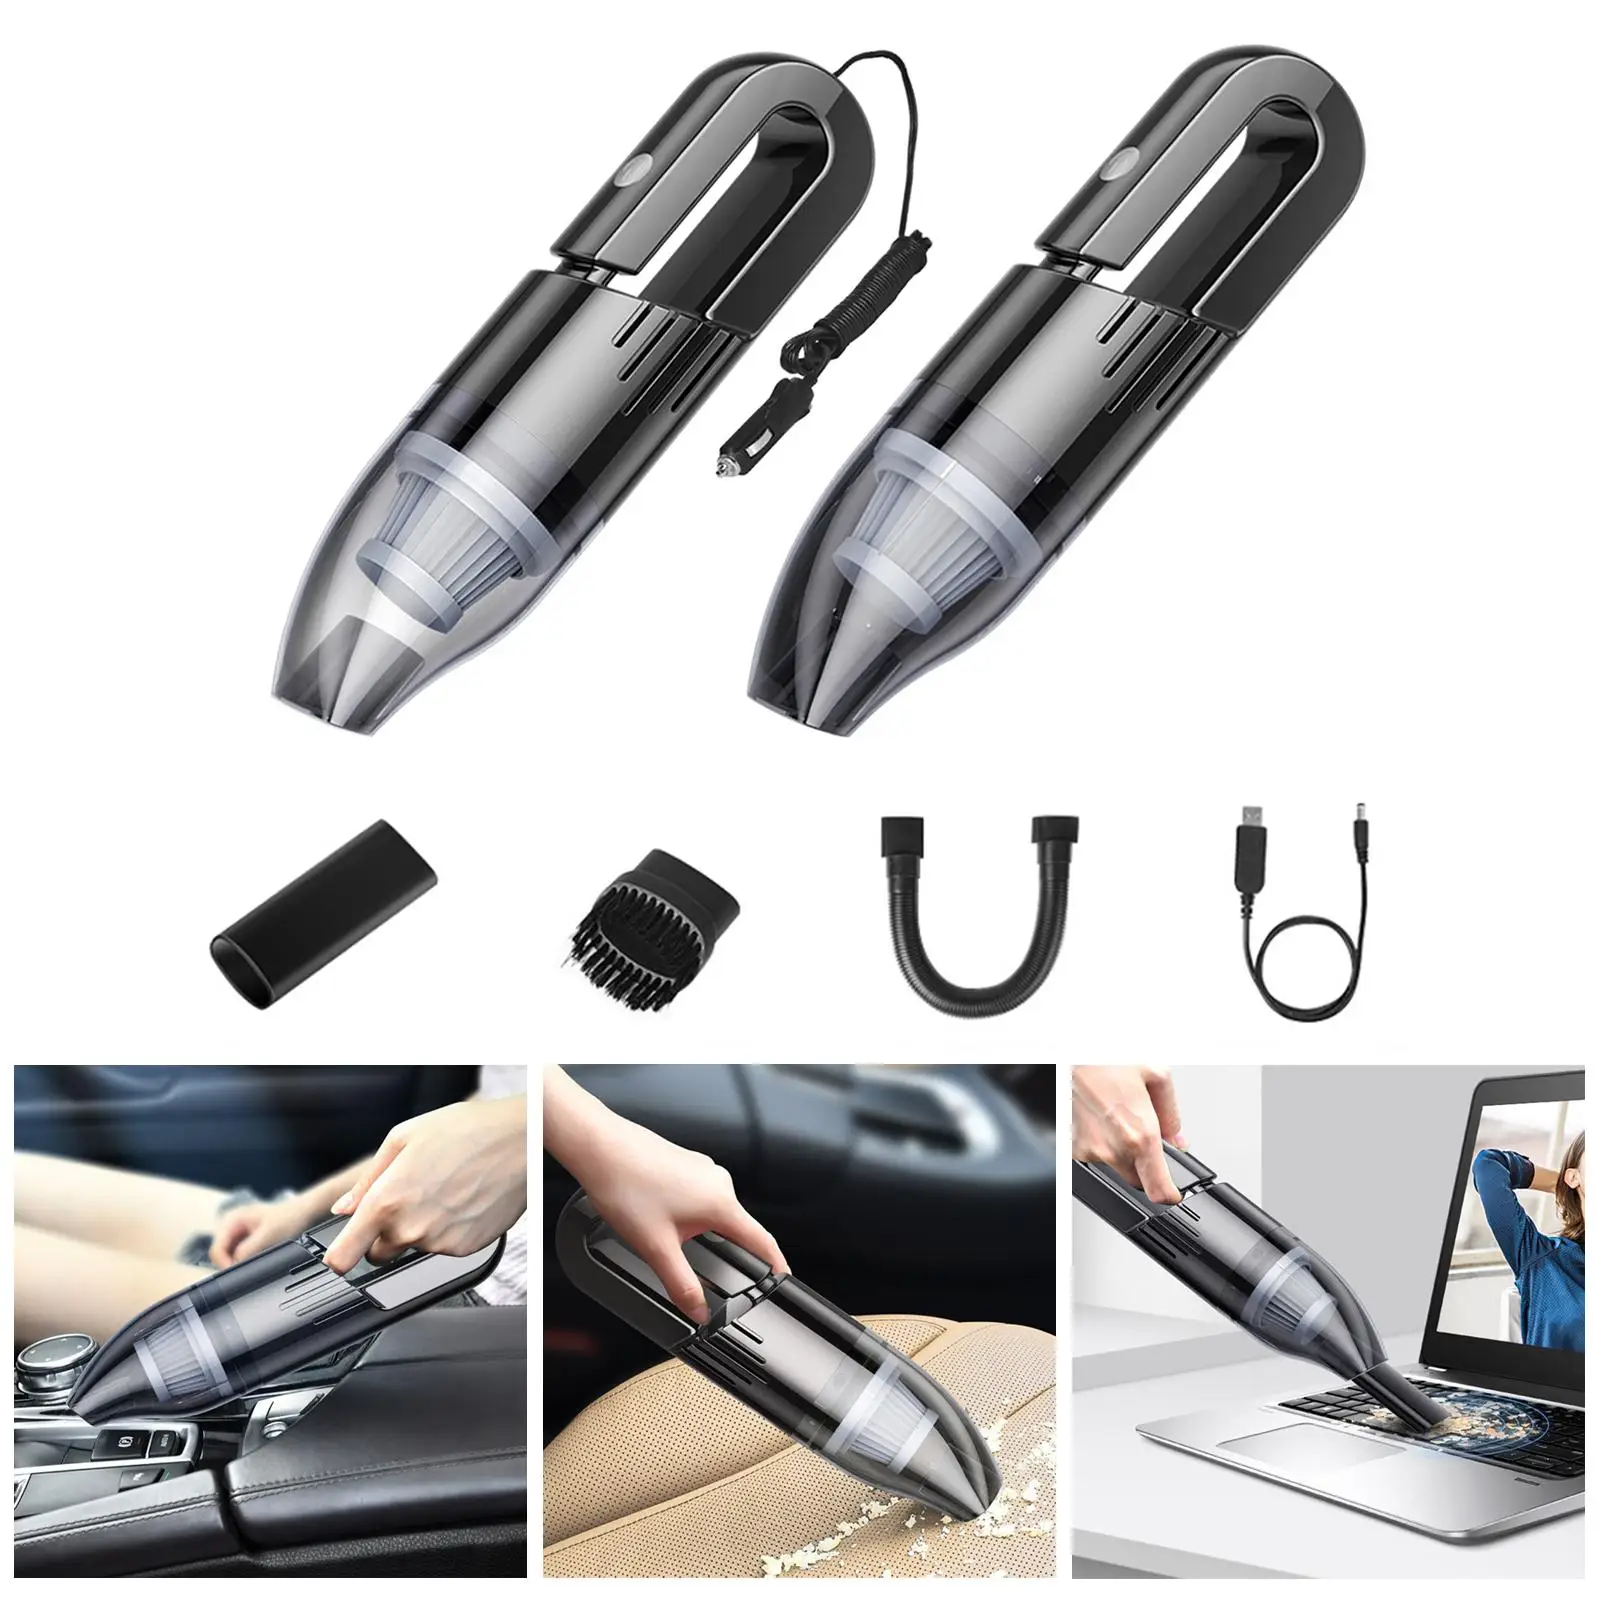 Mini Car Vacuum Cleaner W/Strong Suction Wet and Dry Cleaning for Car Sofa